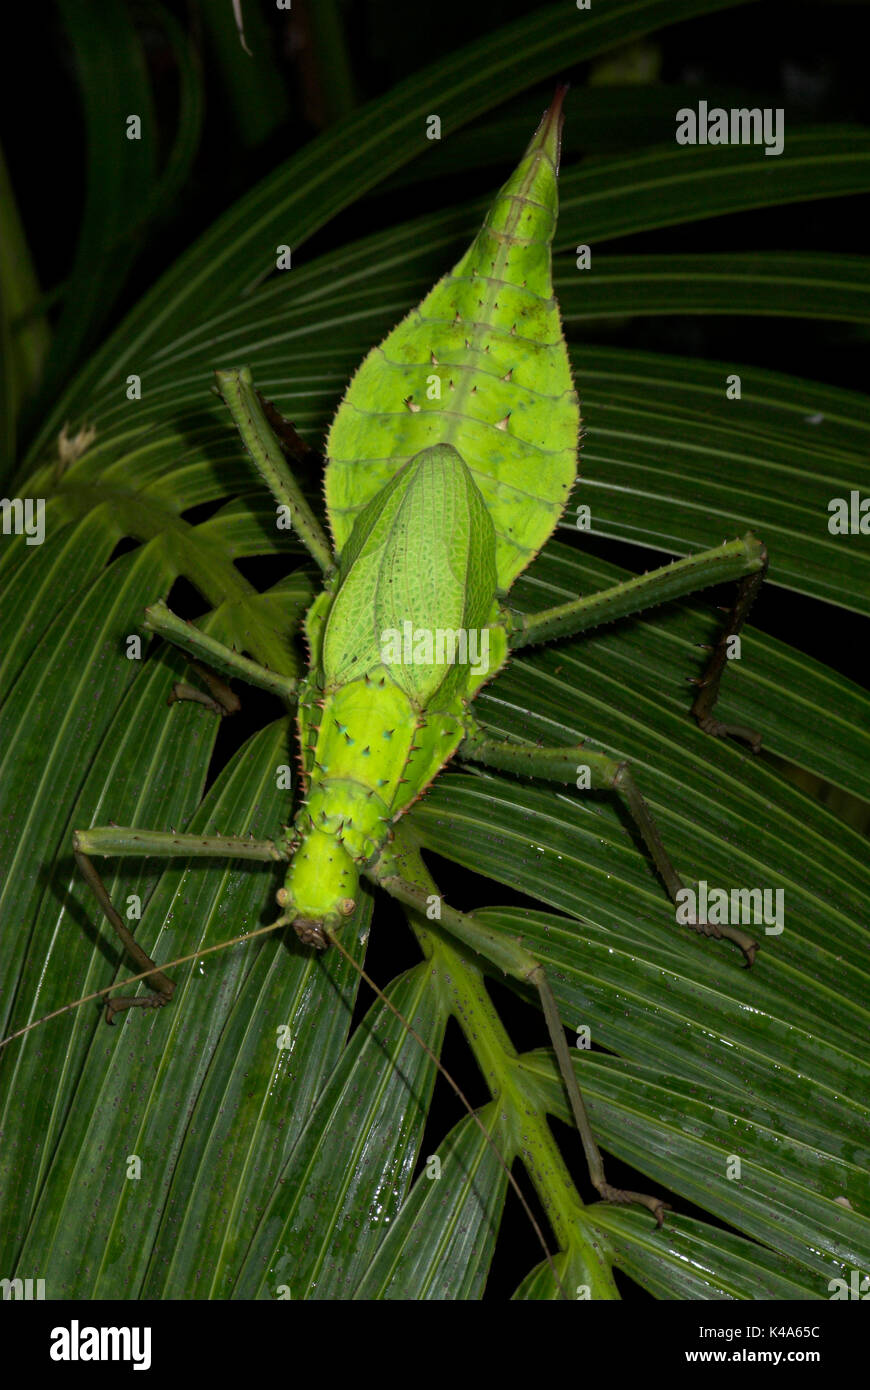 Jungle Nymph, Heteropteryx Dilatata, stick insect, green, camouflaged, Phasmid Stock Photo